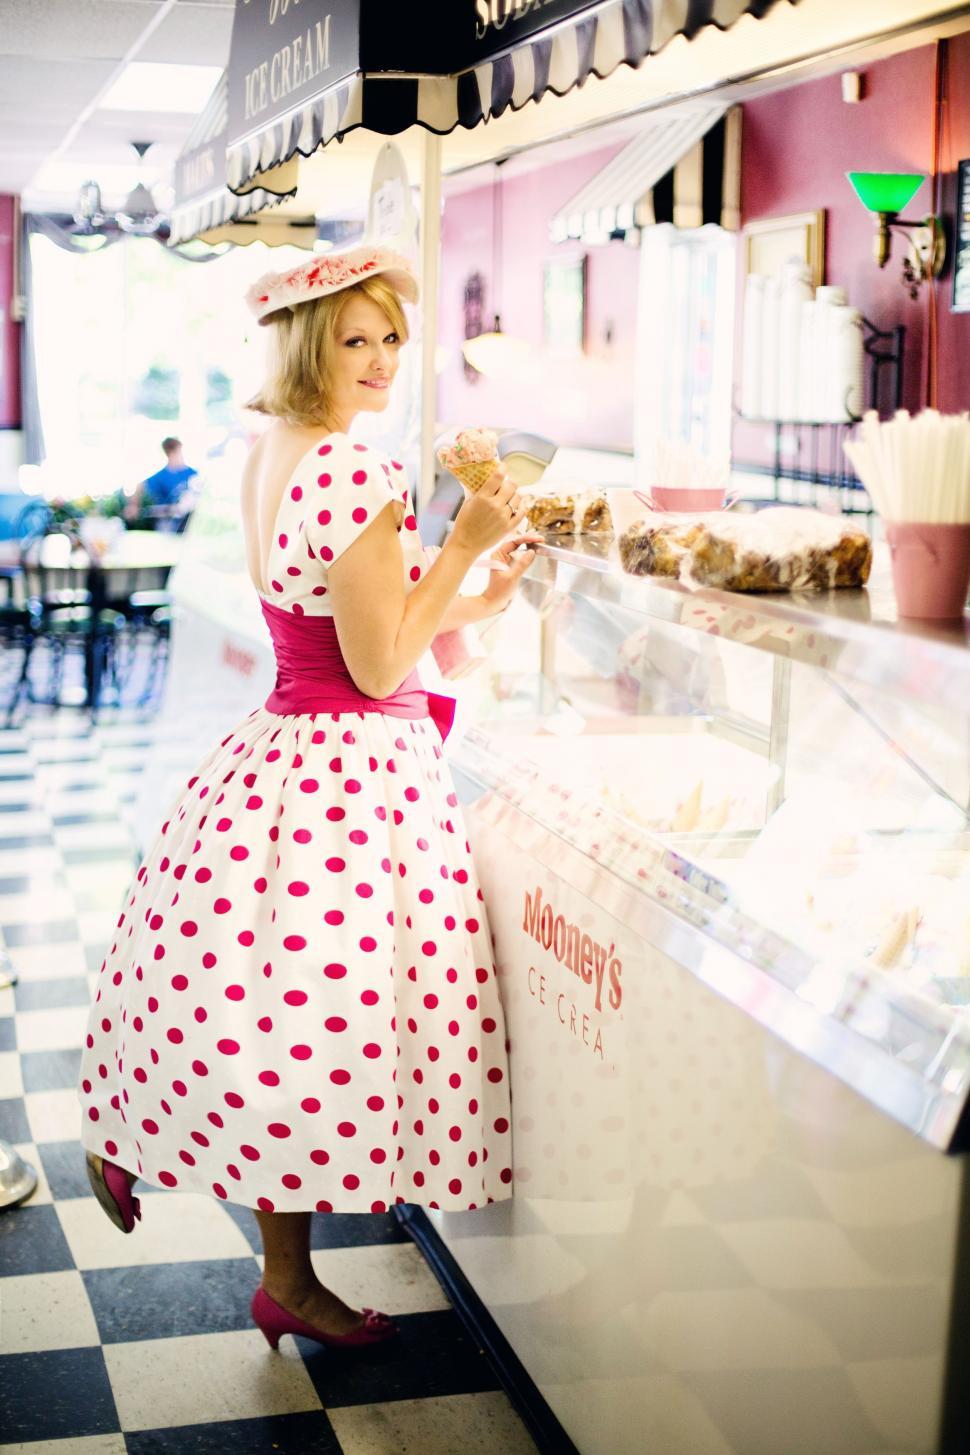 Free Image of Blonde Woman at Ice cream parlour 